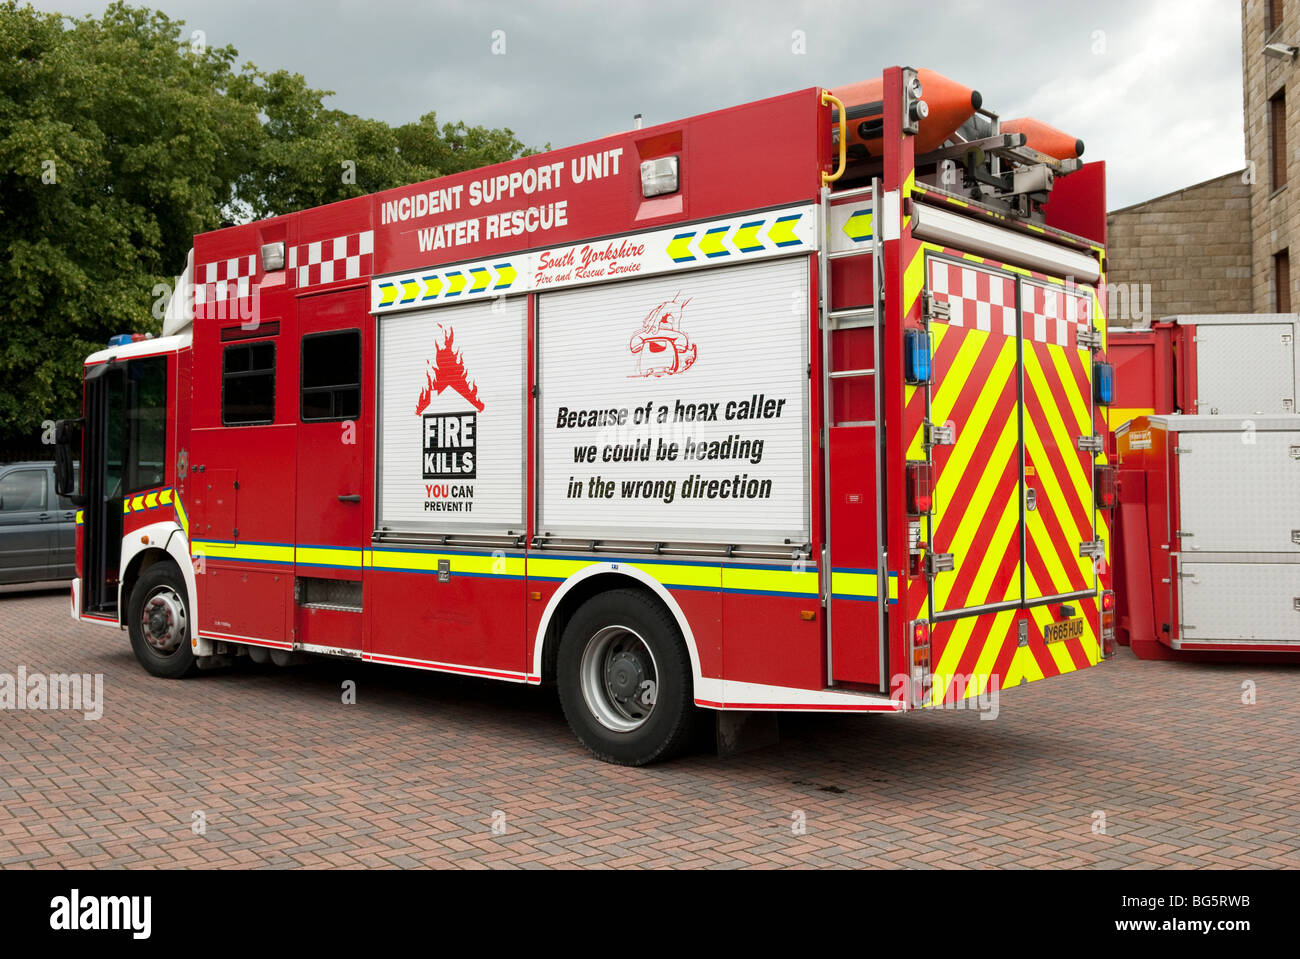 South Yorkshire Fire Service Water Rescue Incident Support Unit Stock Photo